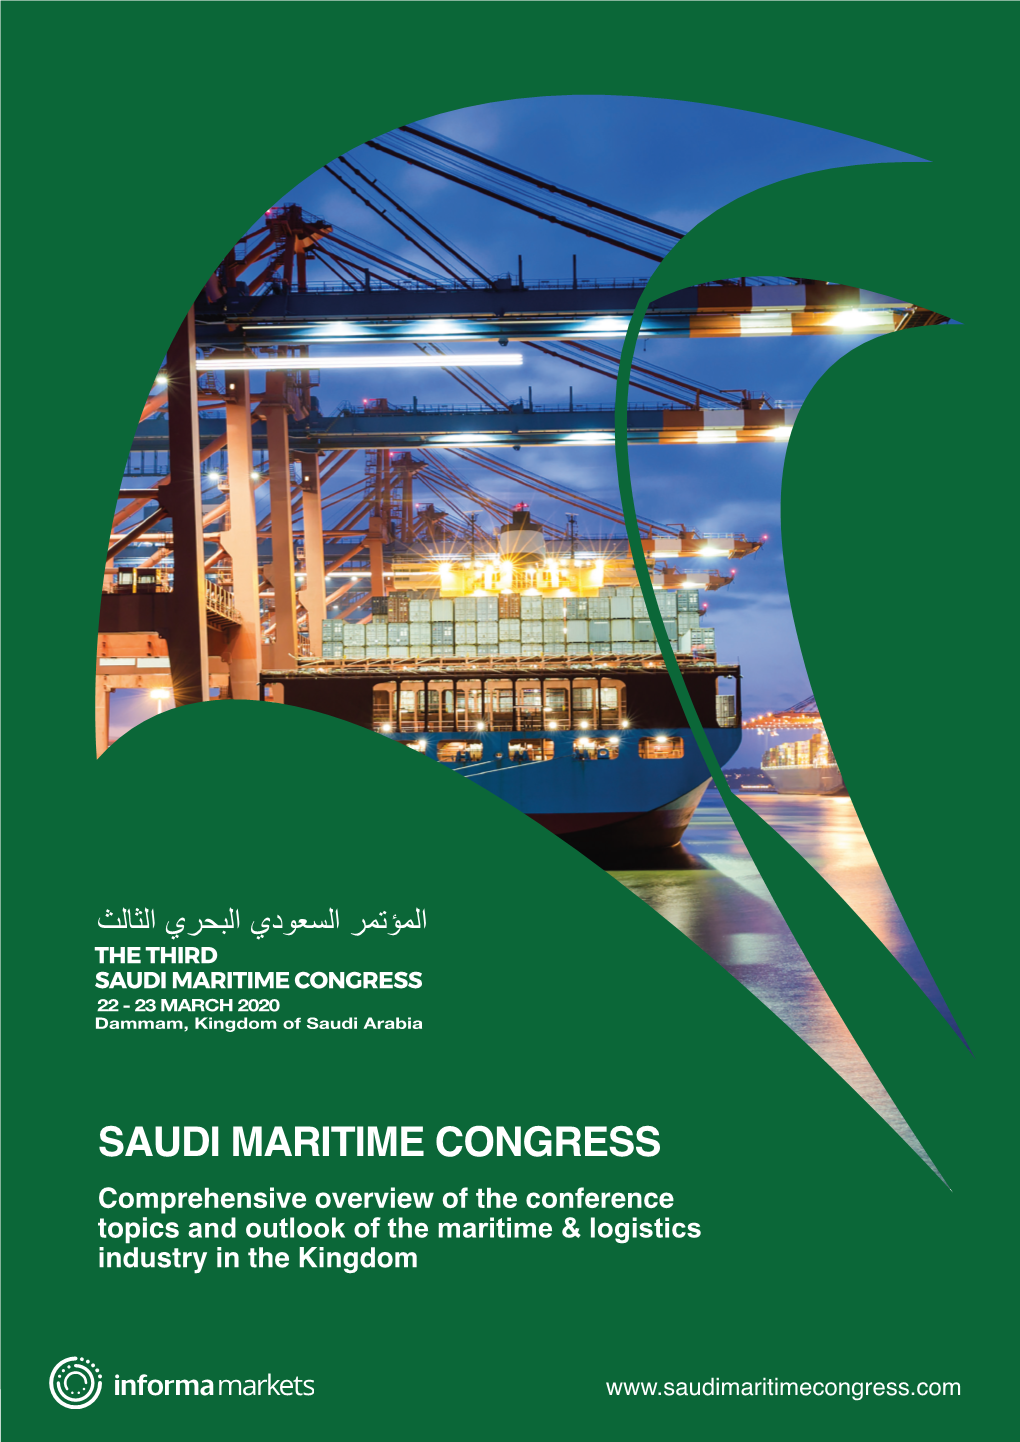 SAUDI MARITIME CONGRESS Comprehensive Overview of the Conference Topics and Outlook of the Maritime & Logistics Industry in the Kingdom